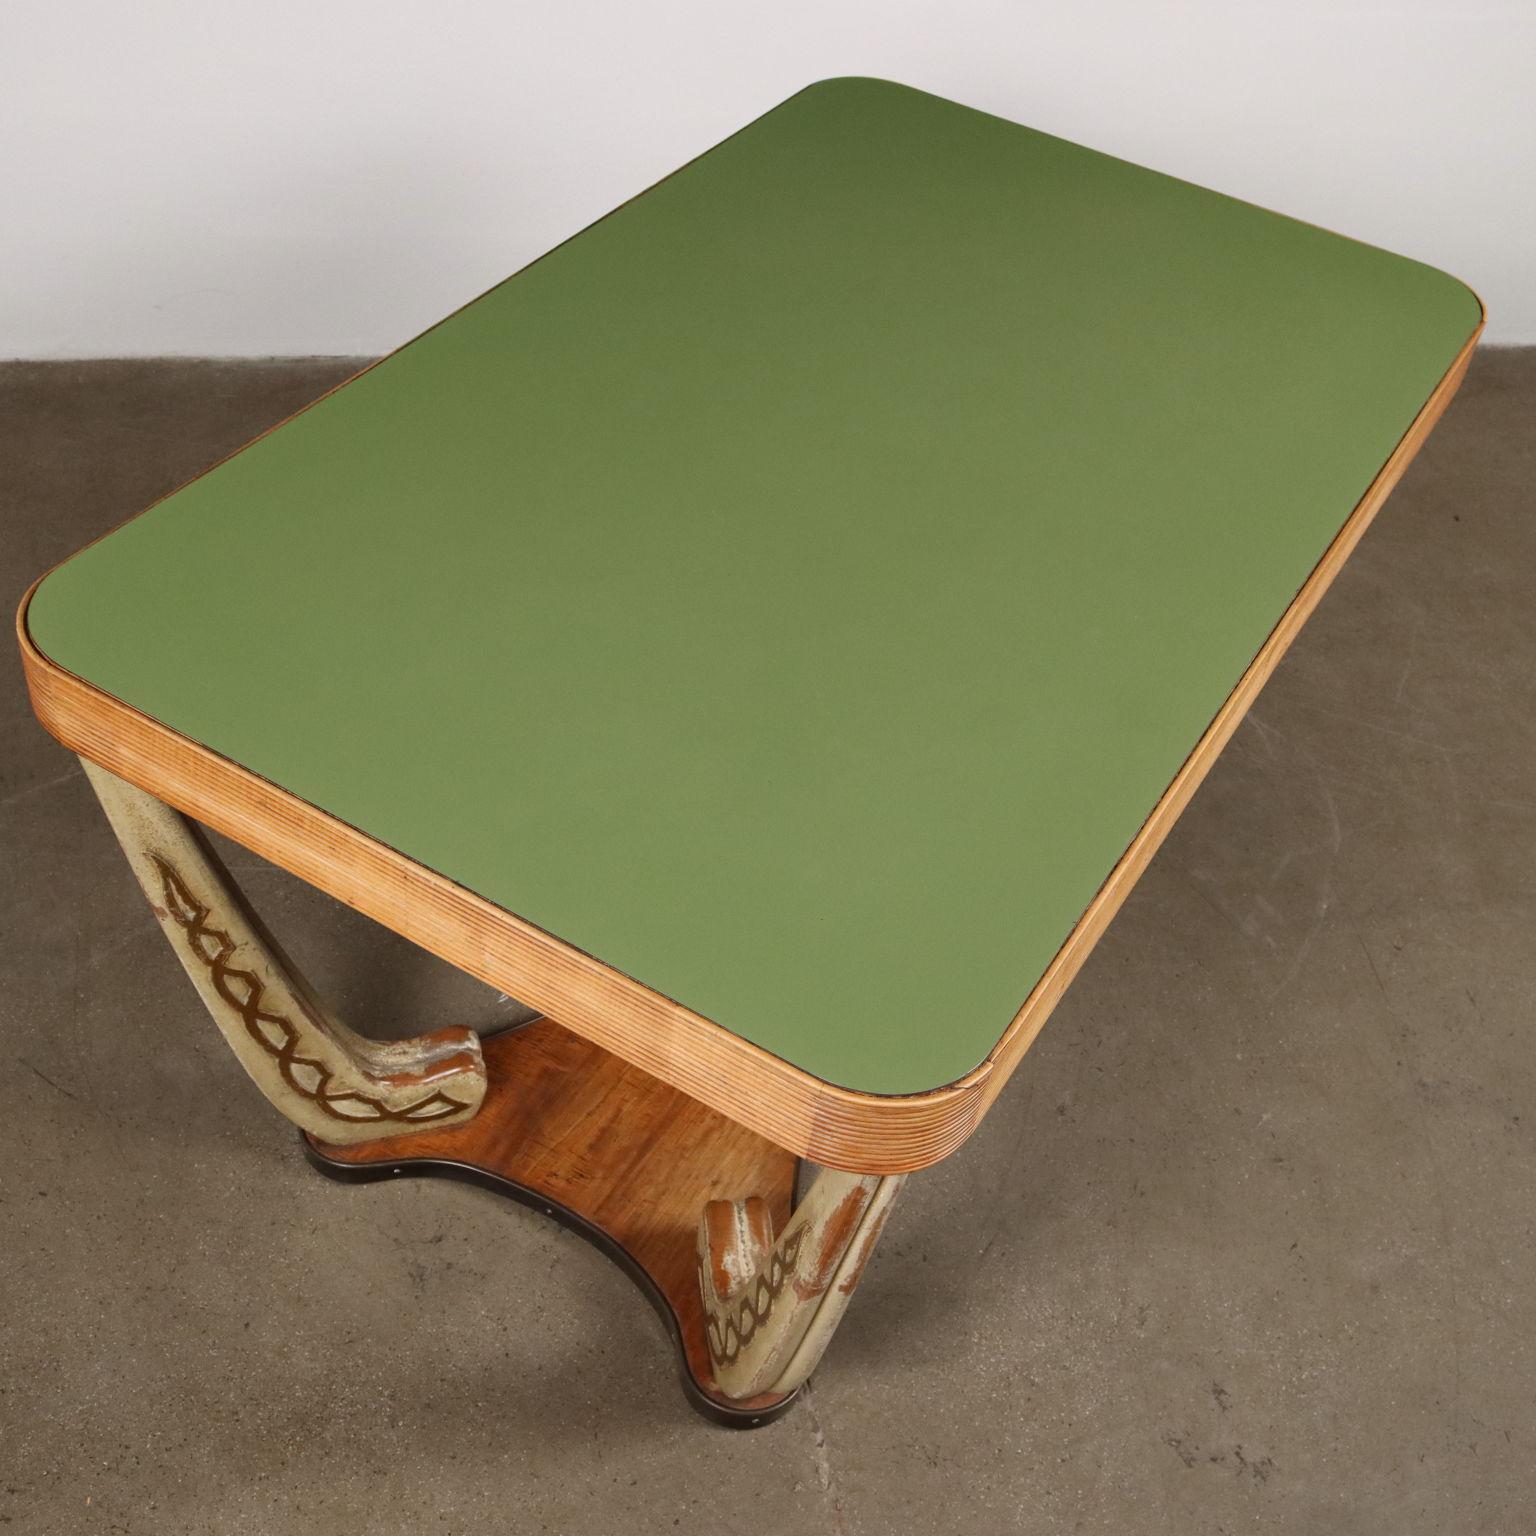 Mid-Century Modern Cantù Furniture Exposition Consortium Table 1950s. For Sale